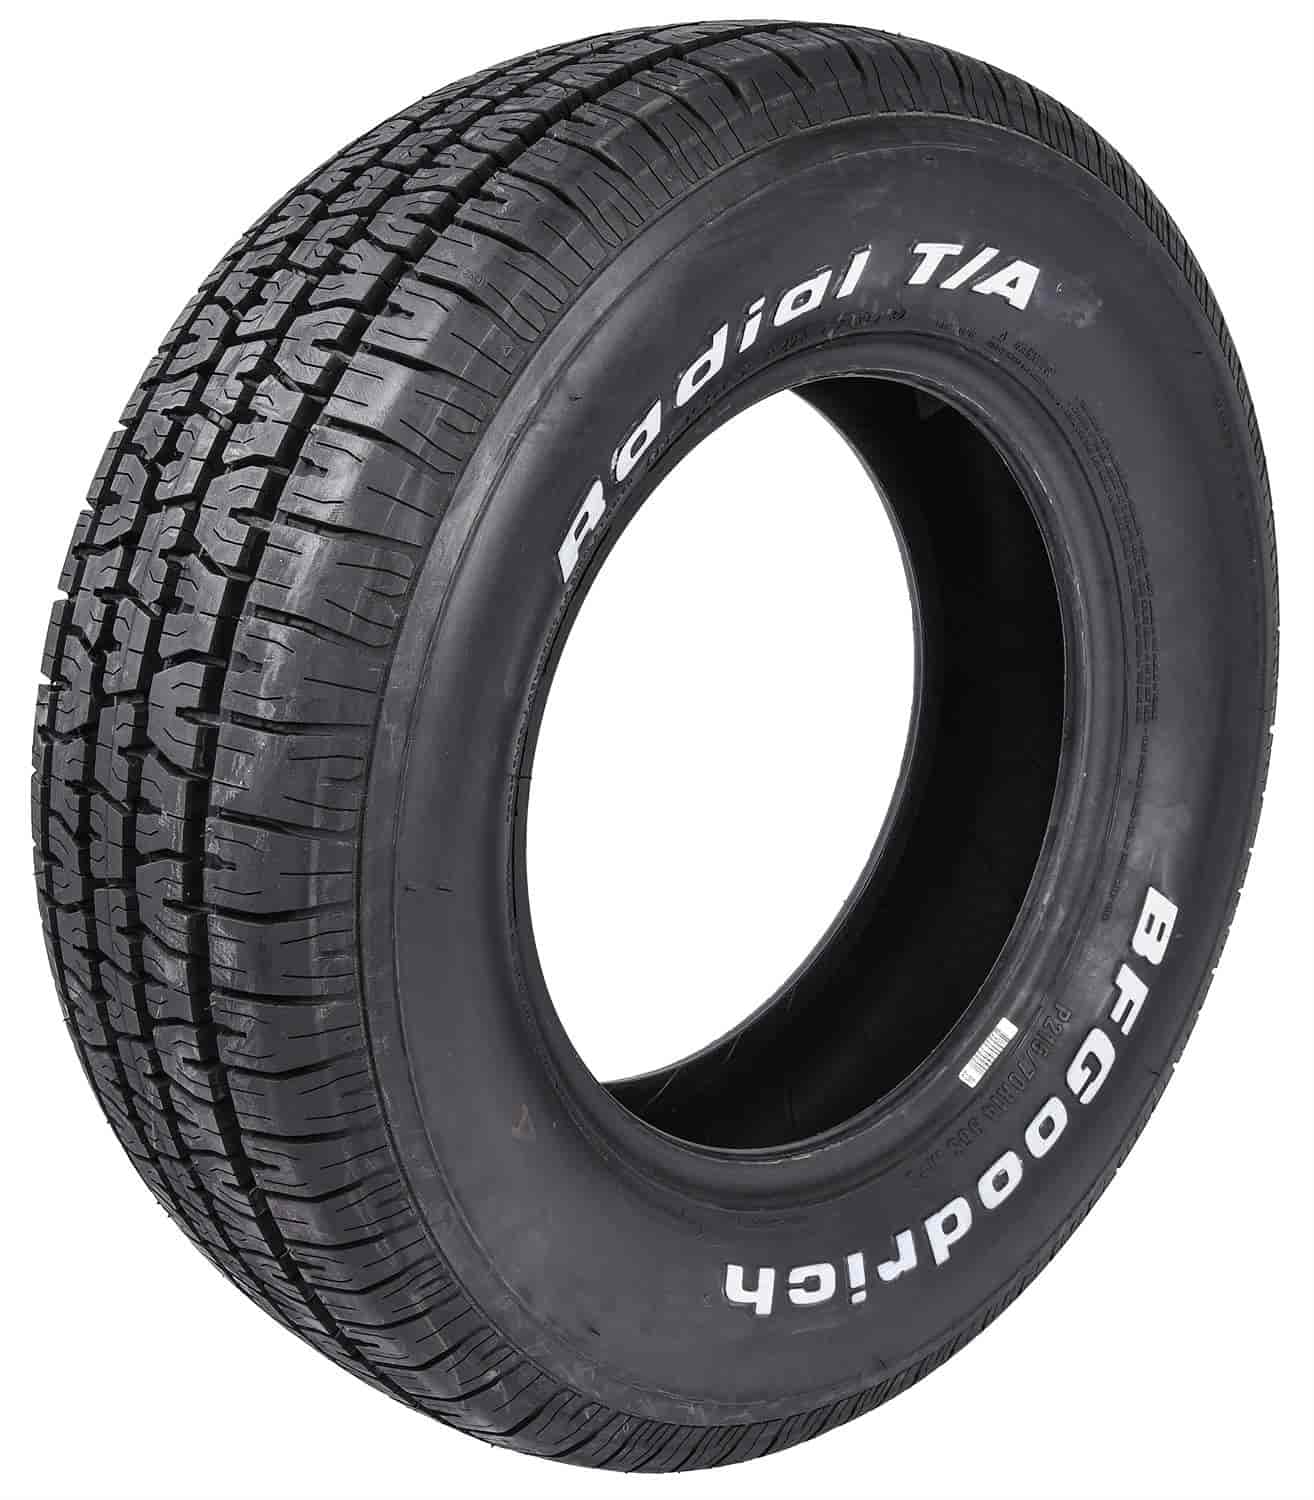 Radial T/A Tire P215/70R14